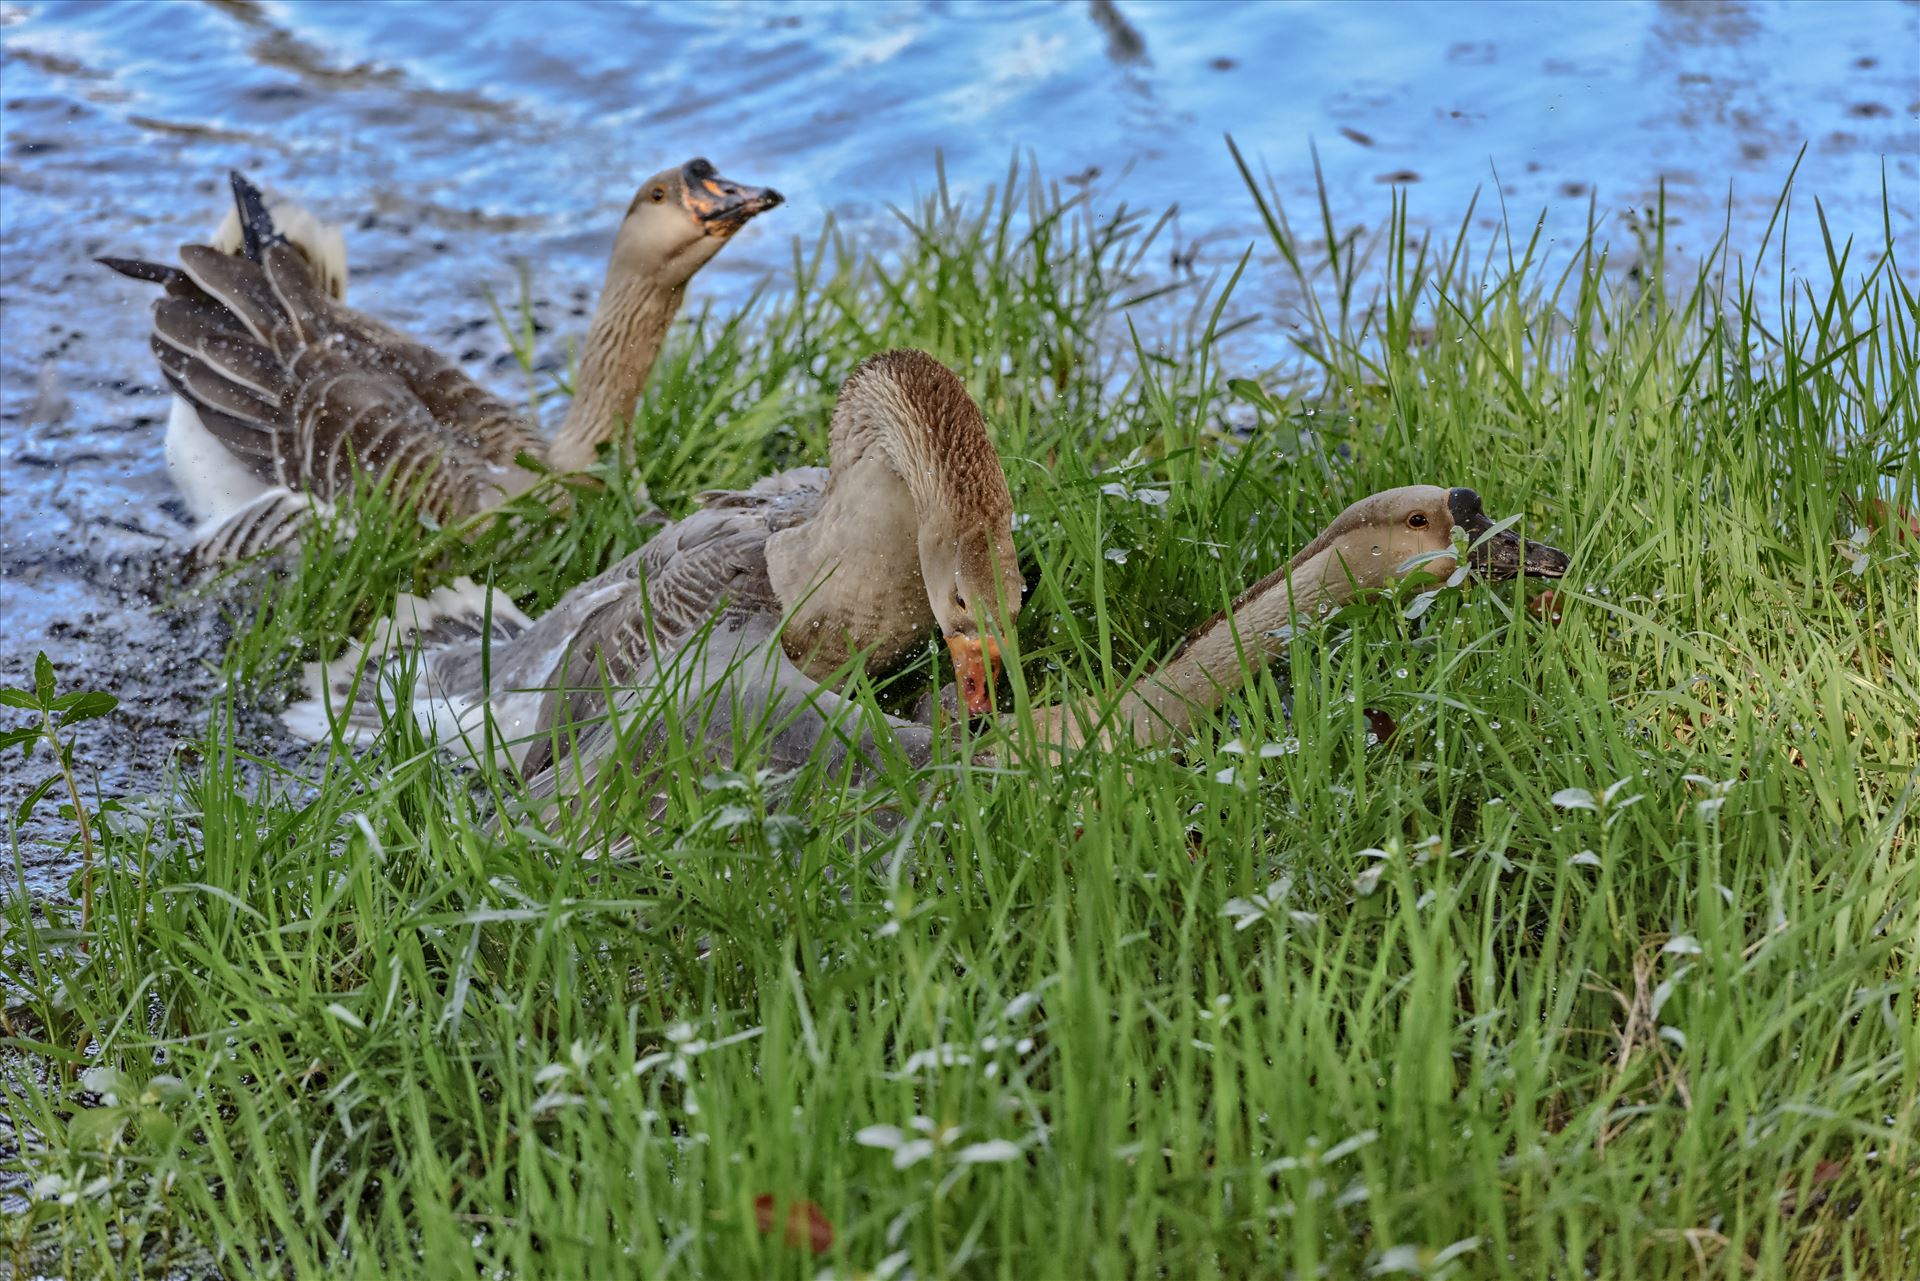 Geese mma at lake caroline 8108182.jpg  by Terry Kelly Photography